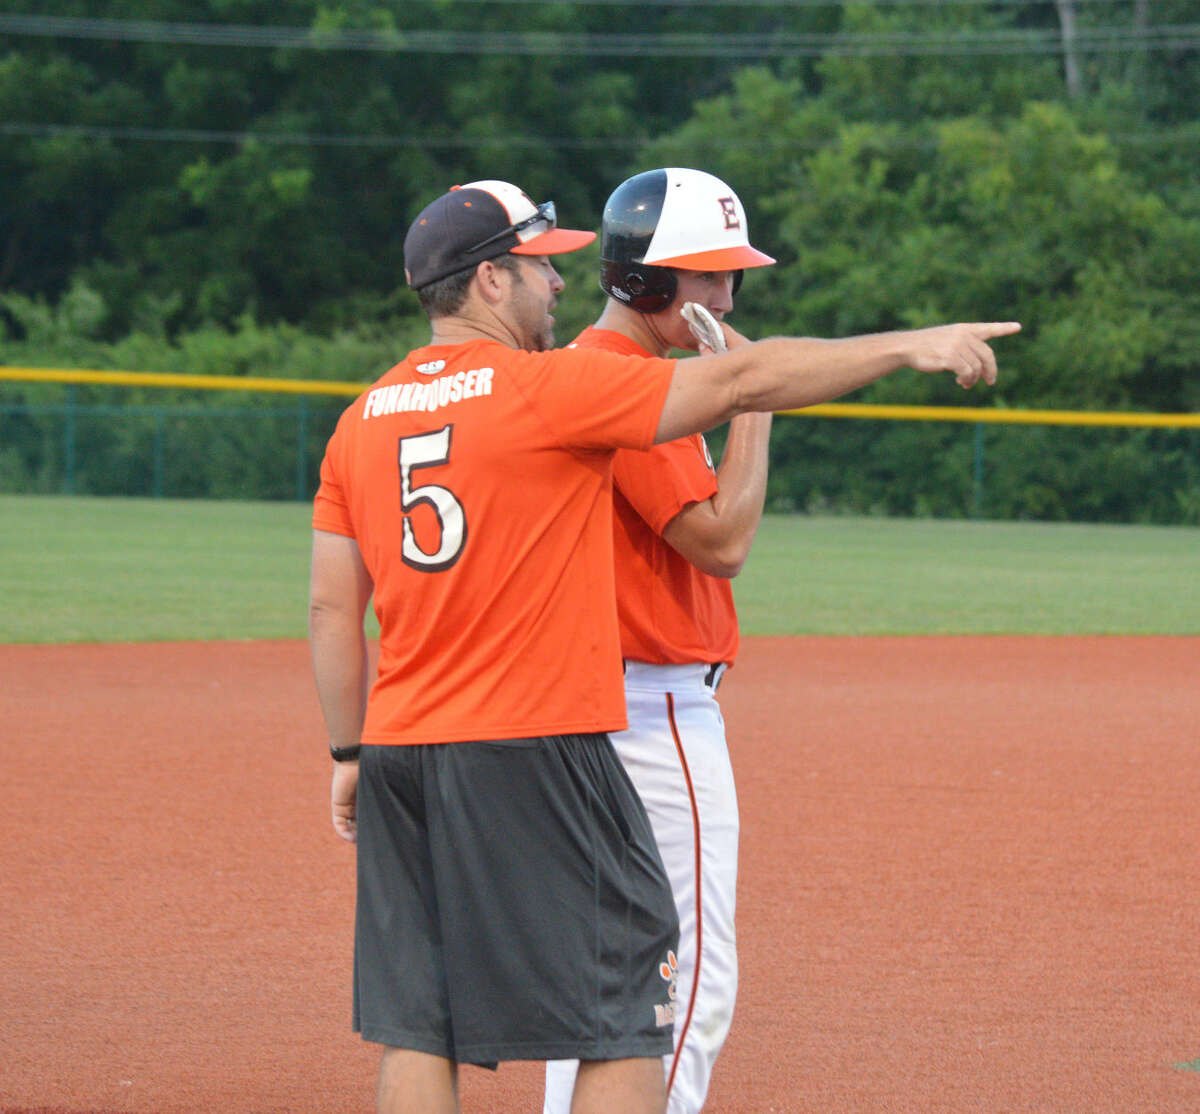 Tigers coach Tim Funkhouser talks to Daniel Reed after Reed reached third base in the fourth inning.